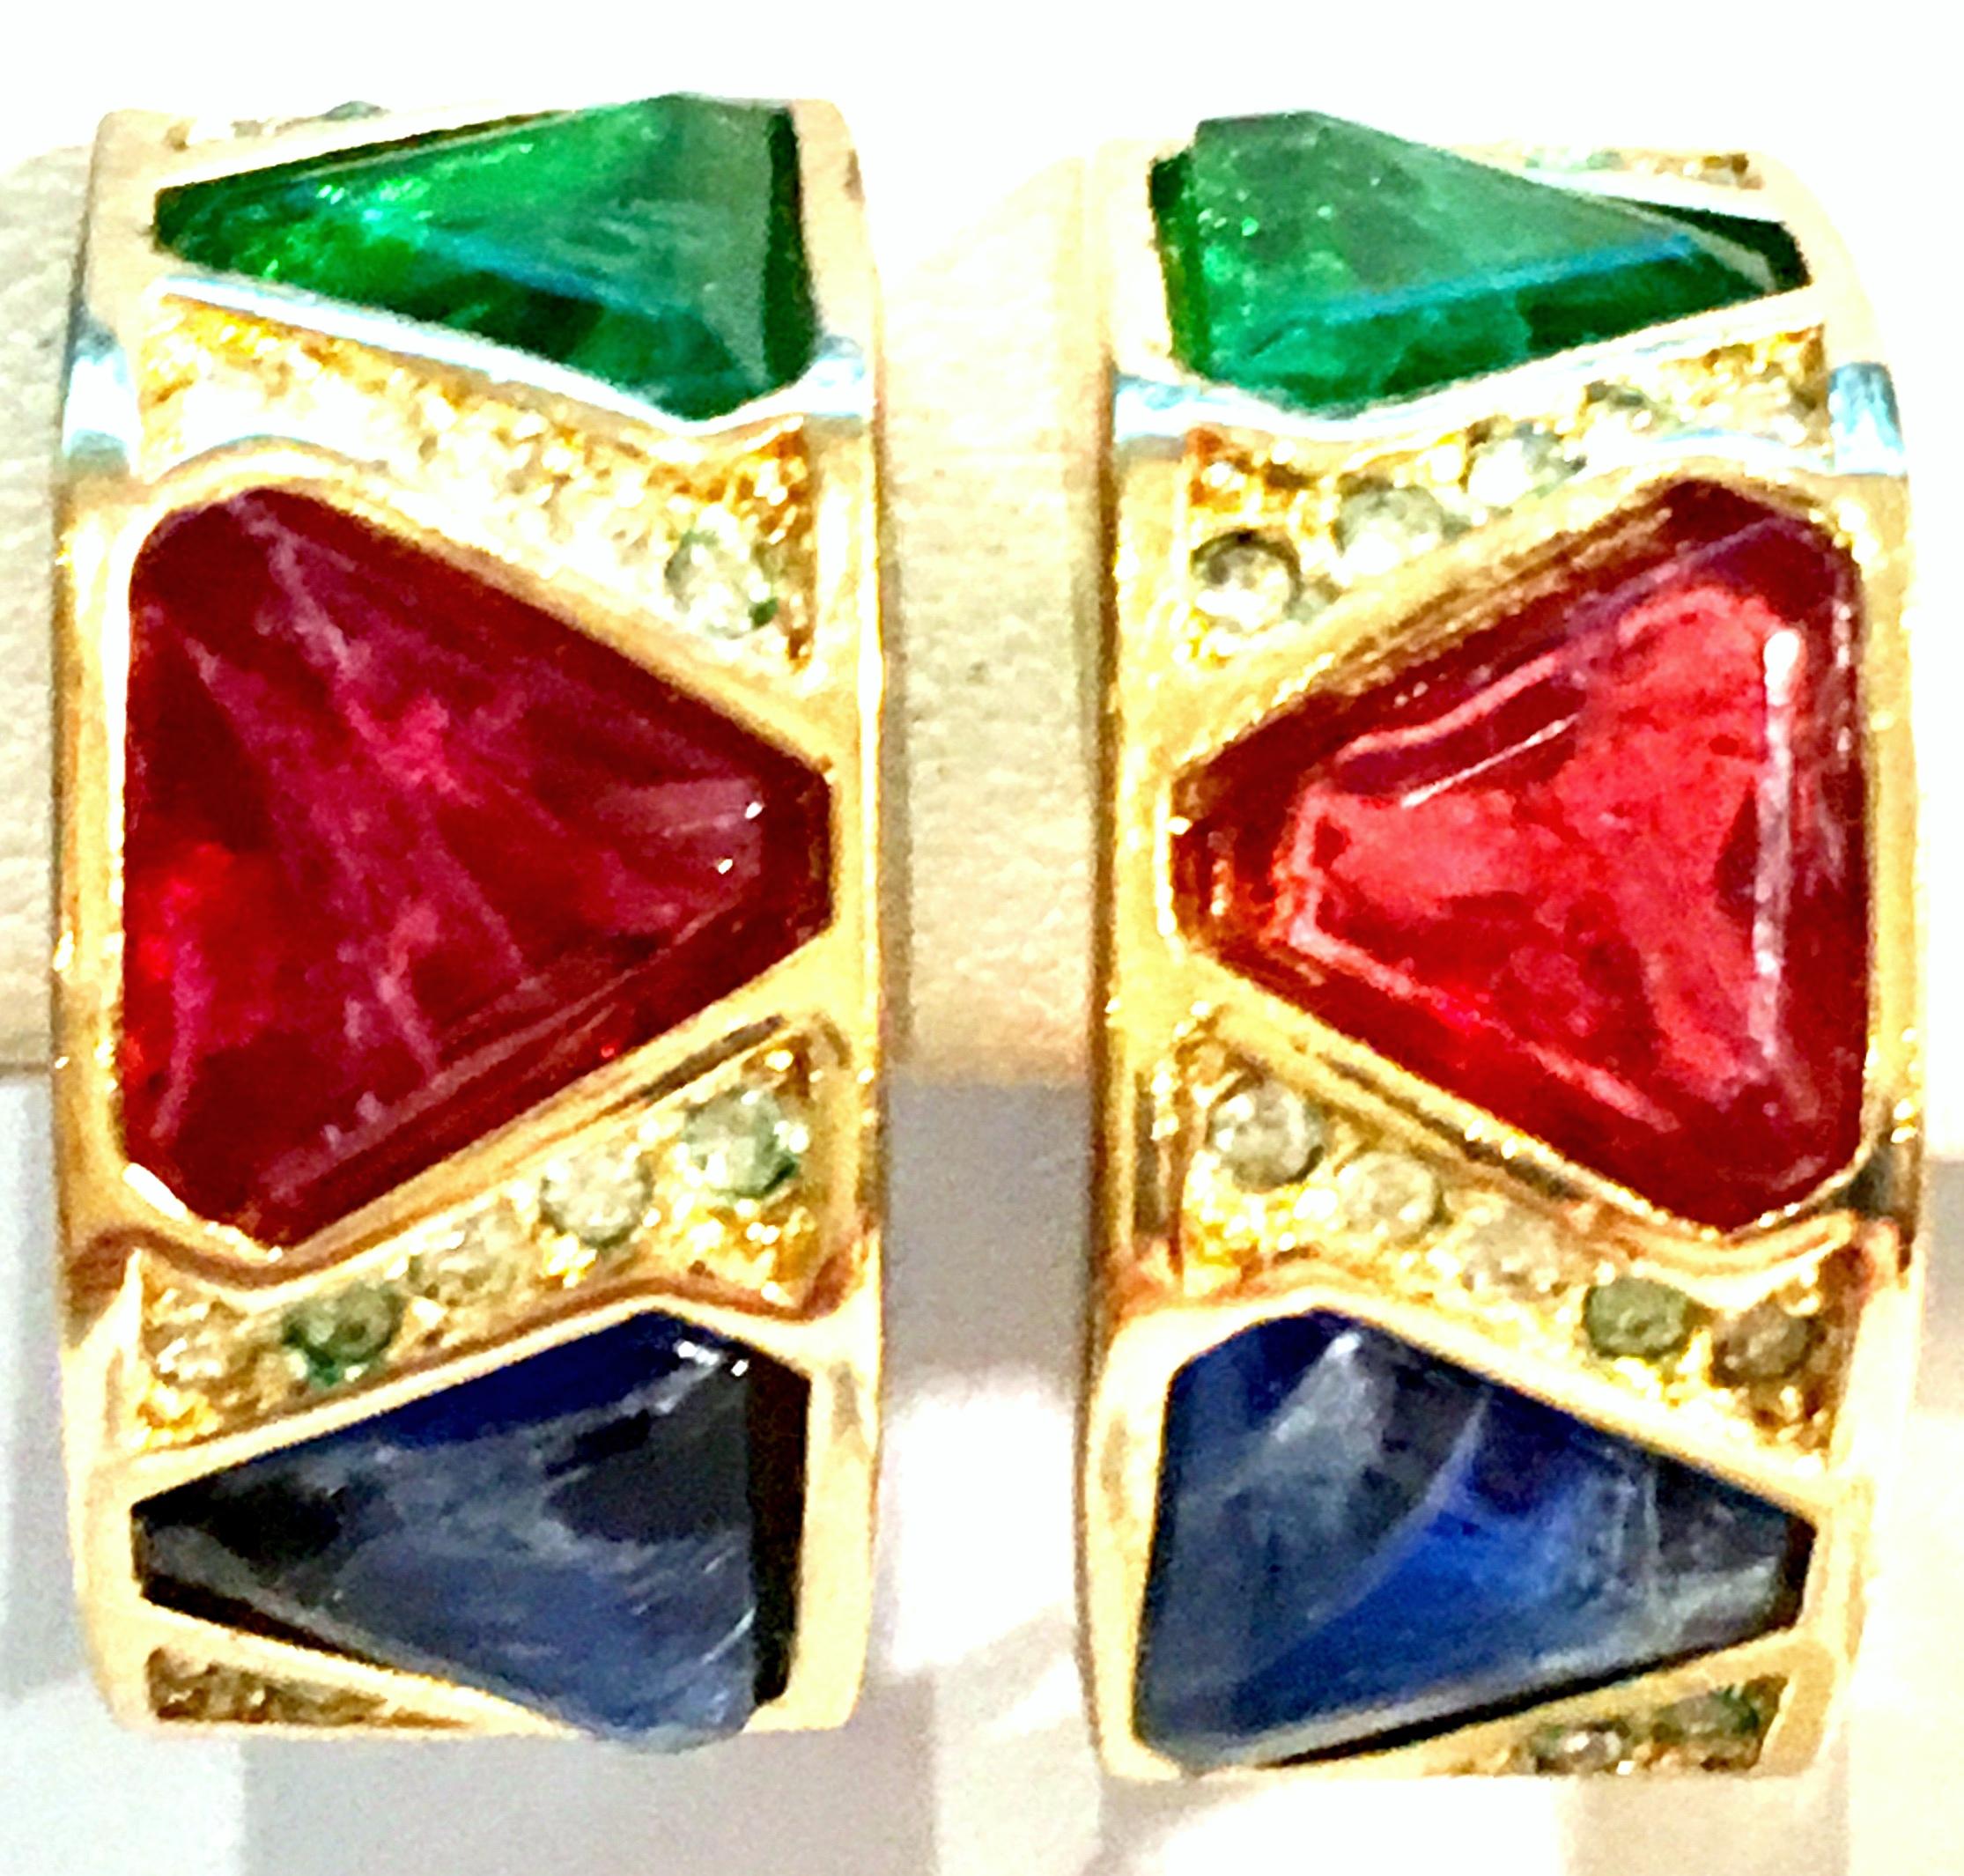 20th Century Pair Of Christian Dior Gold Plate & Austrian Crystal Semi Hoop Earrings.
These finely crafted gold plate semi hoop earrings feature brilliant cut and faceted pave set of blue, green and red with colorless stone accents. These clip style